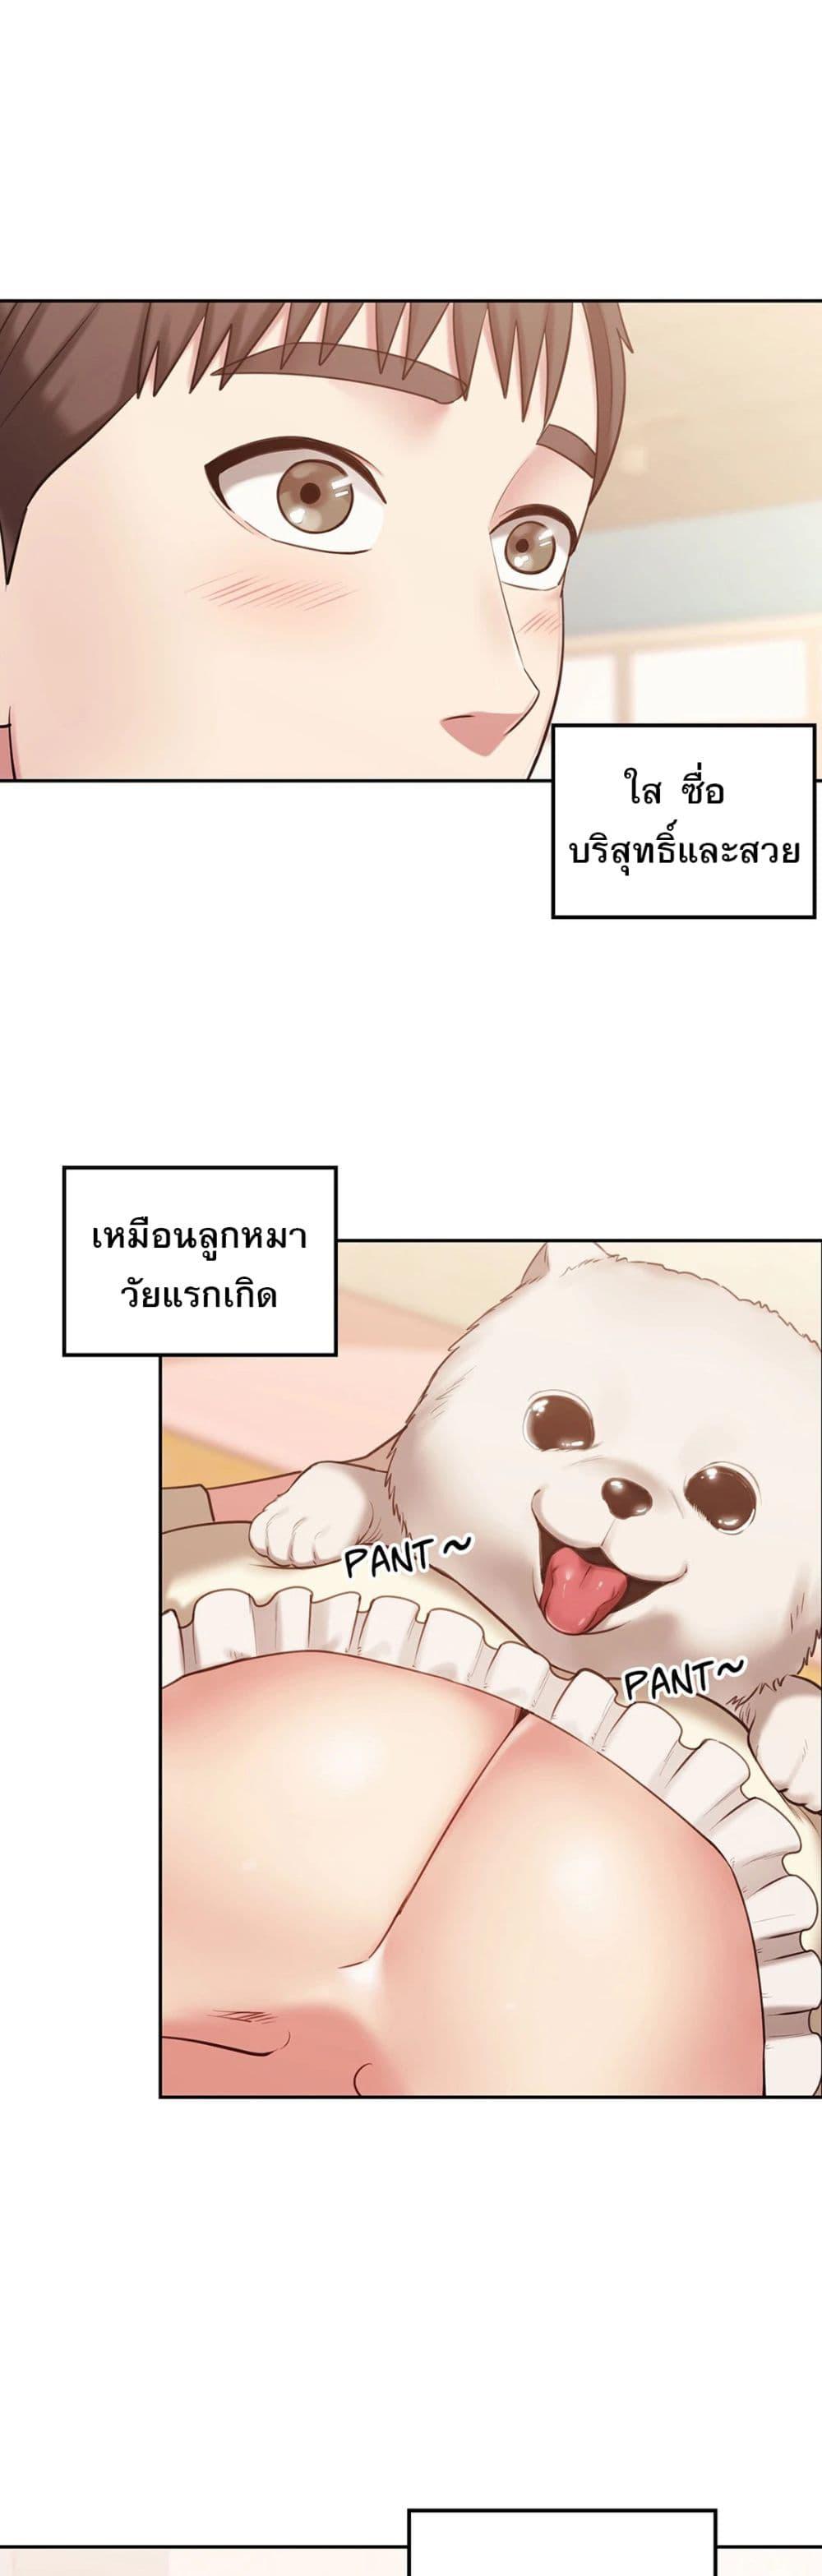 Sexual Consulting 1 ภาพ 7